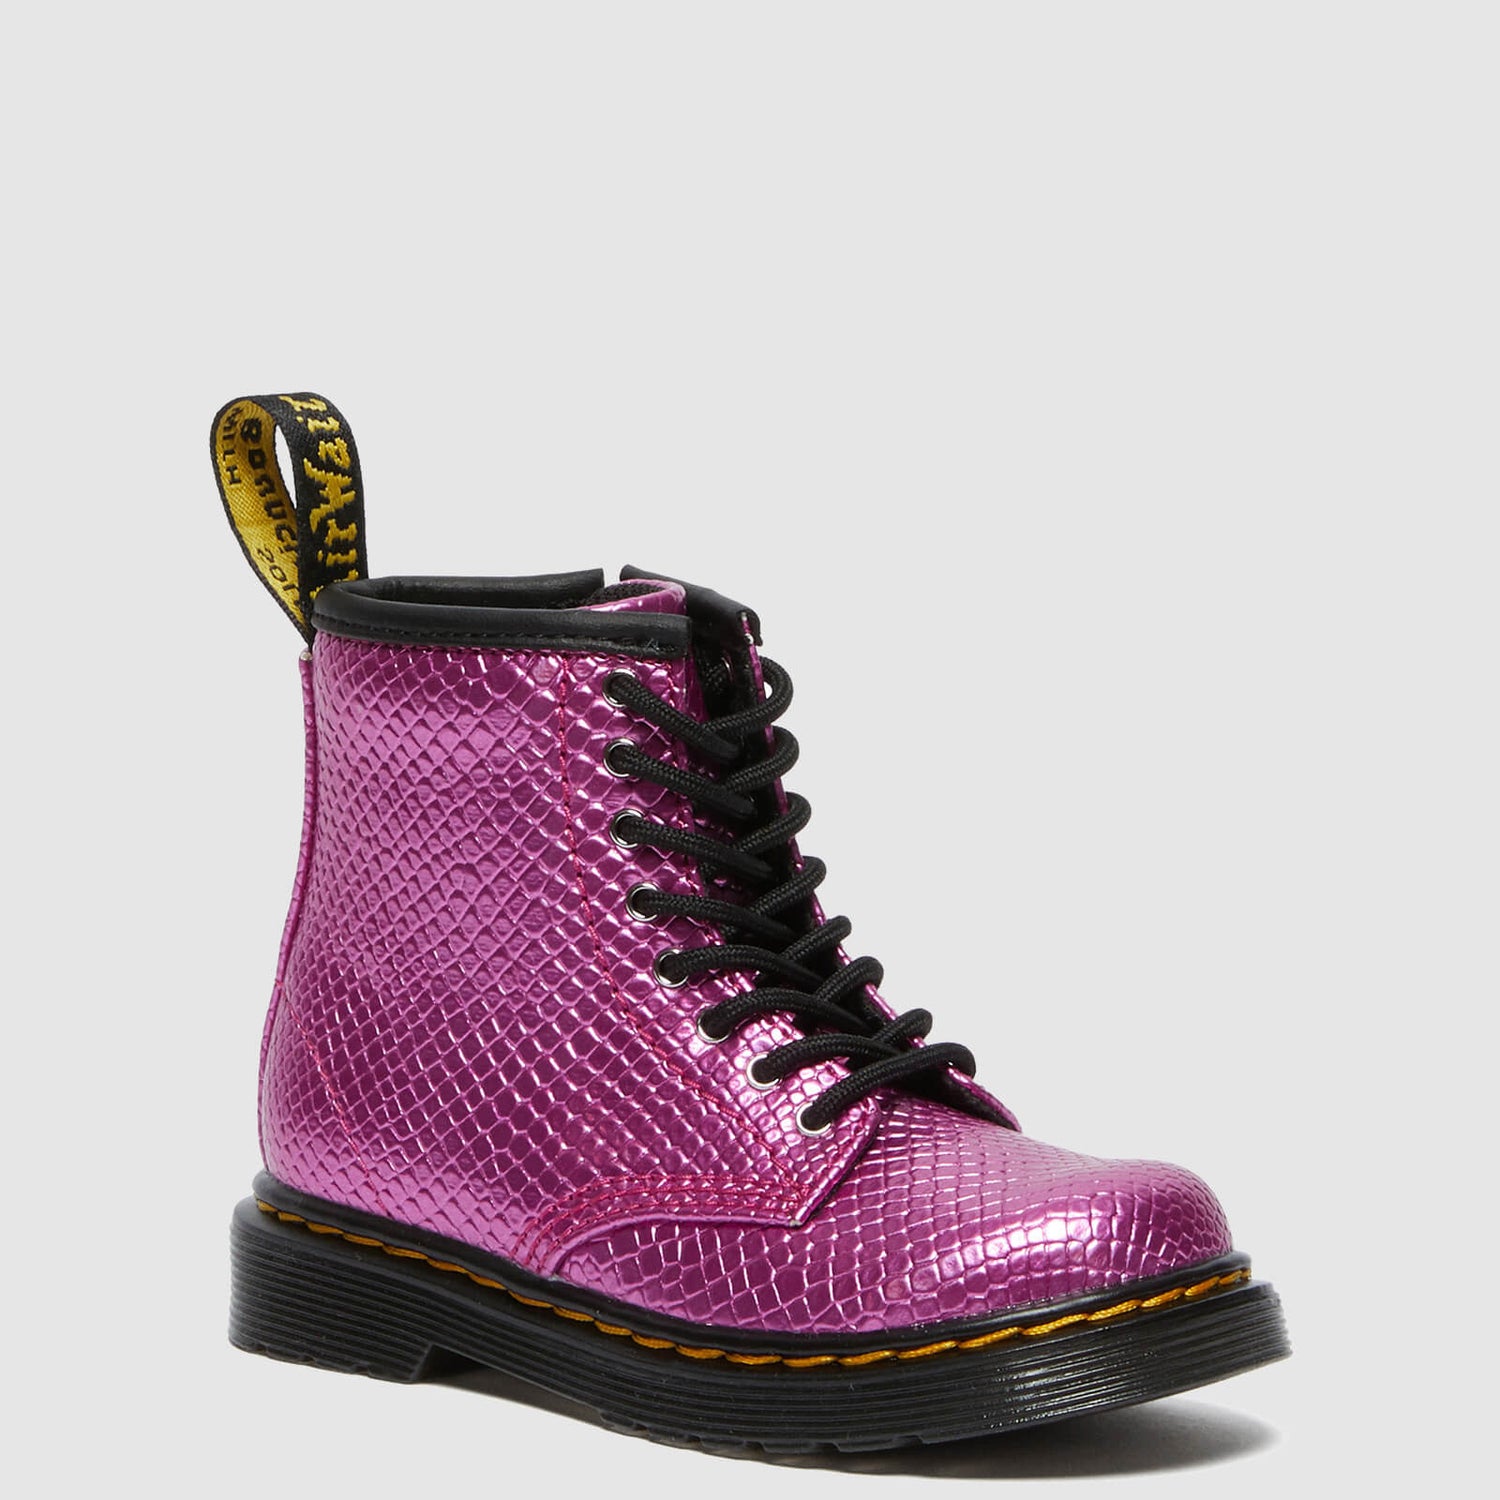 Dr. Martens Toddlers' 1460 Patent Lamper Lace Up Boots - Pink Reptile Emboss